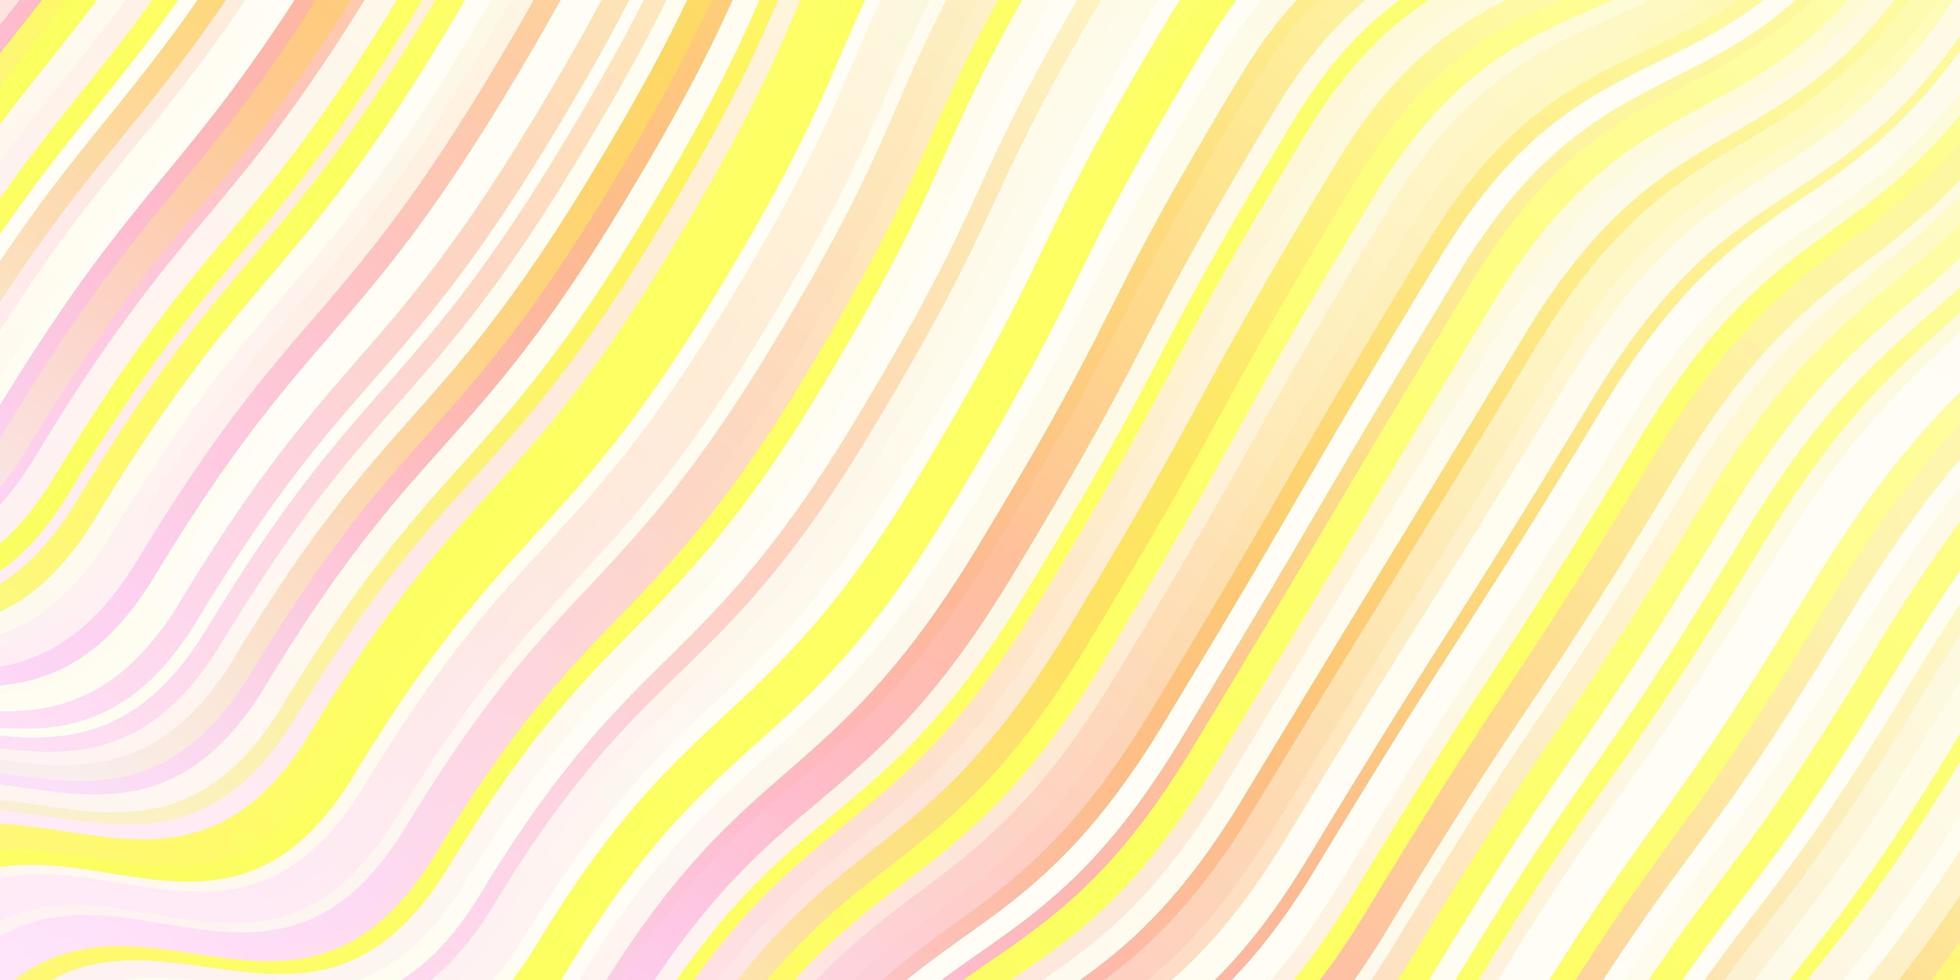 Light Pink, Yellow vector pattern with curved lines. Abstract illustration with gradient bows. Smart design for your promotions.